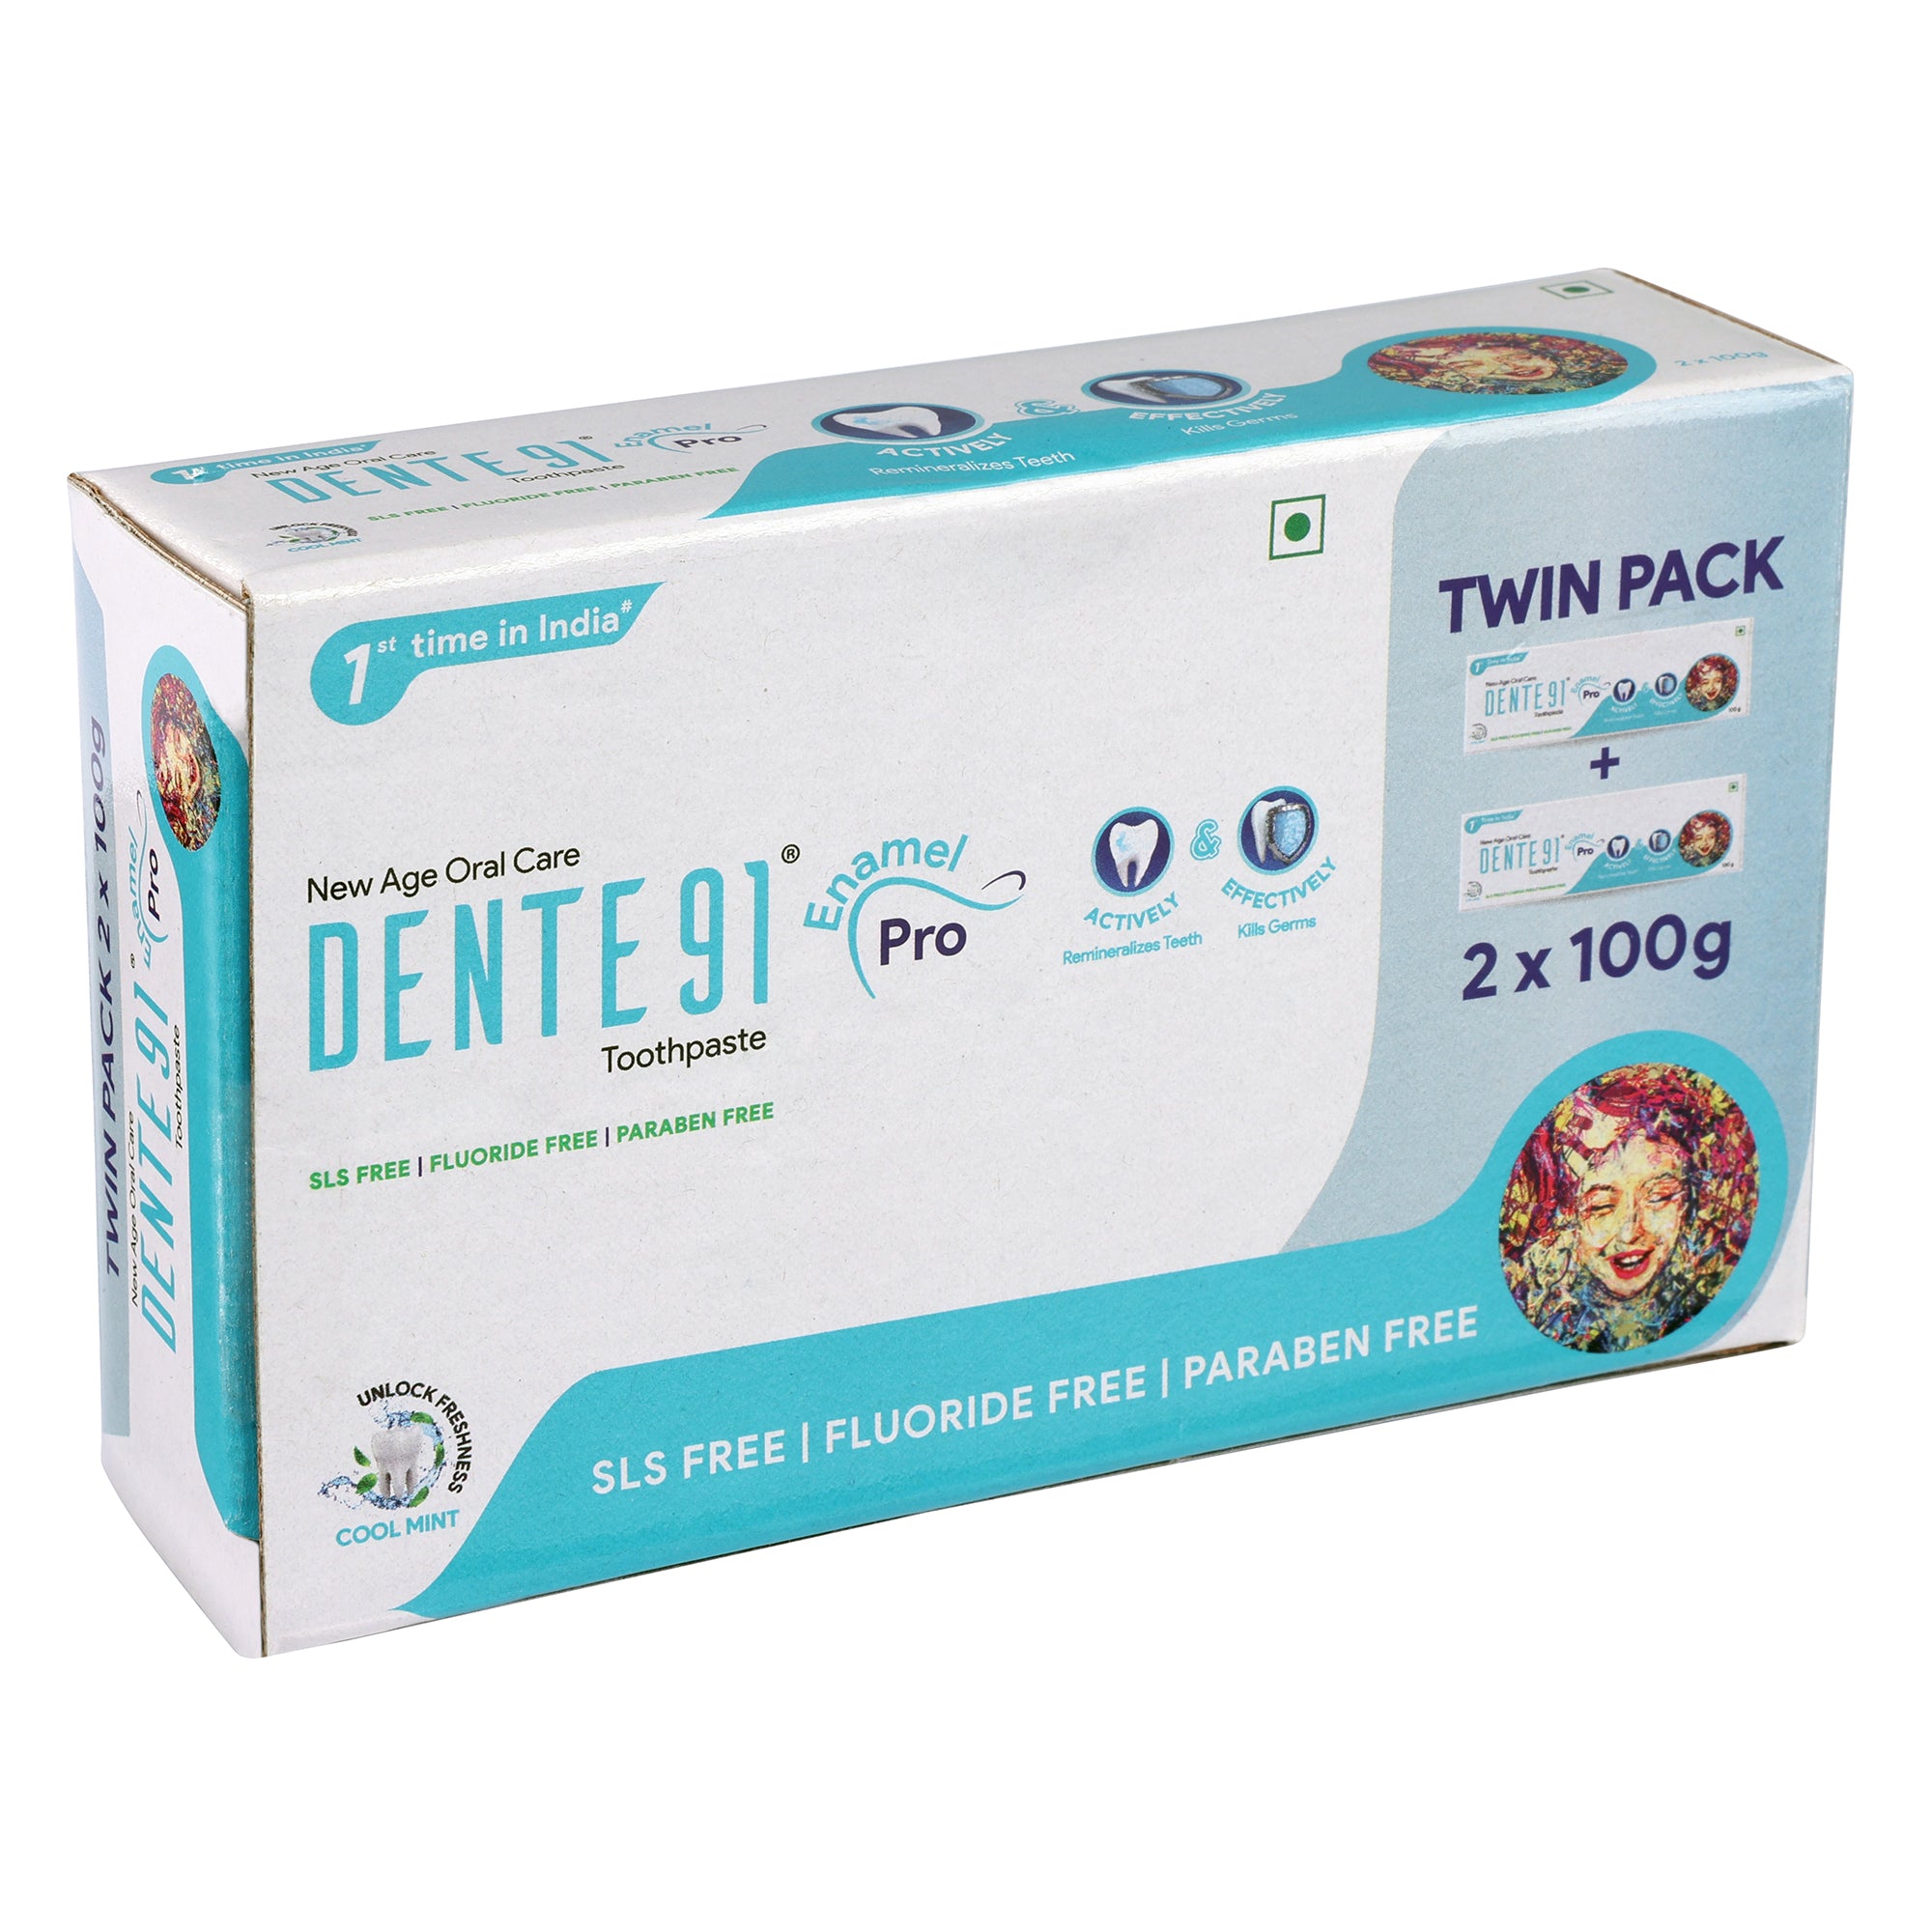 Dente91 Cool Mint Toothpaste, Strengthens Enamel, Repairs Cavities, Remineralizes Teeth , Sensitivity Relief, SLS Free, Fluoride Free, Paraben Free, Pack of 2, 200g